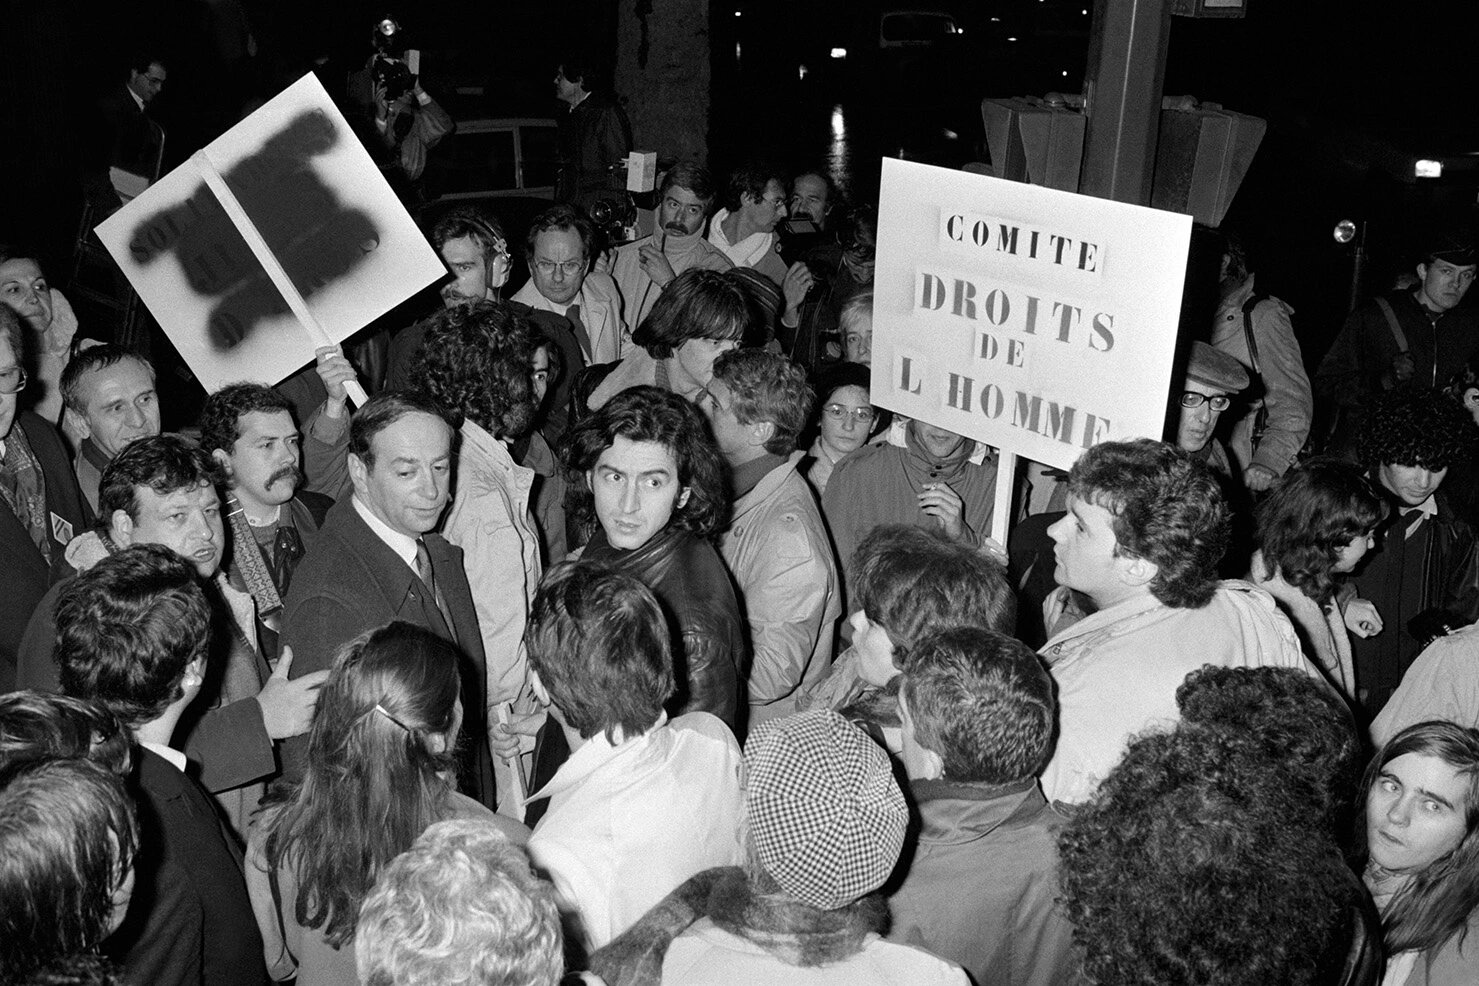 Bernard-Henri Lévy during a demonstration in support of the Soviet dissident Andrei Sakharov in front of the Soviet Embassy in Paris on Dec. 7, 1981.